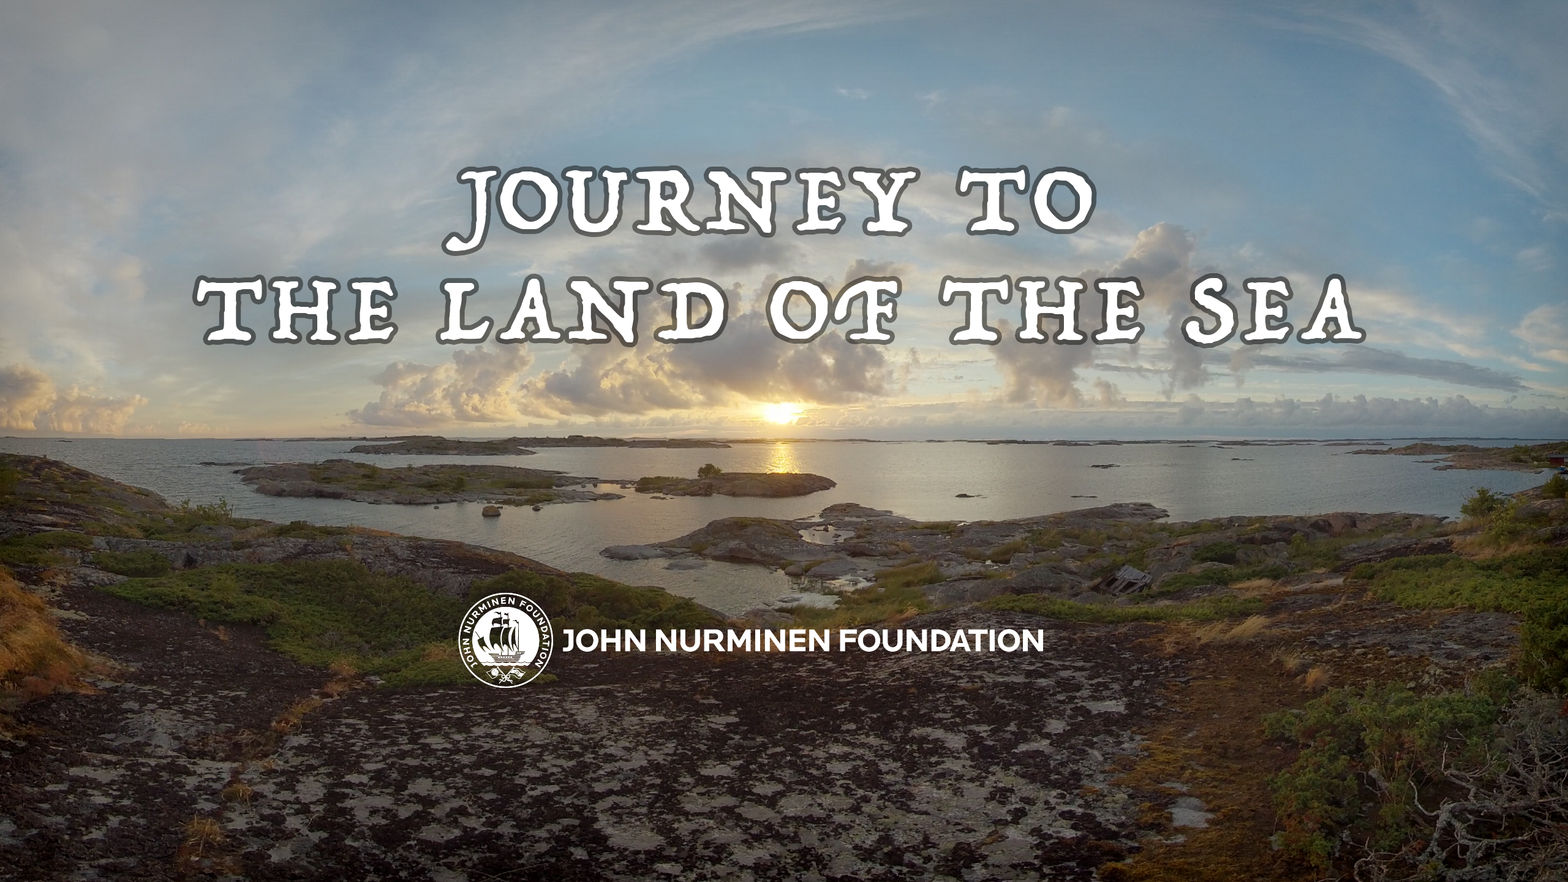 Journey to the Land of the Sea